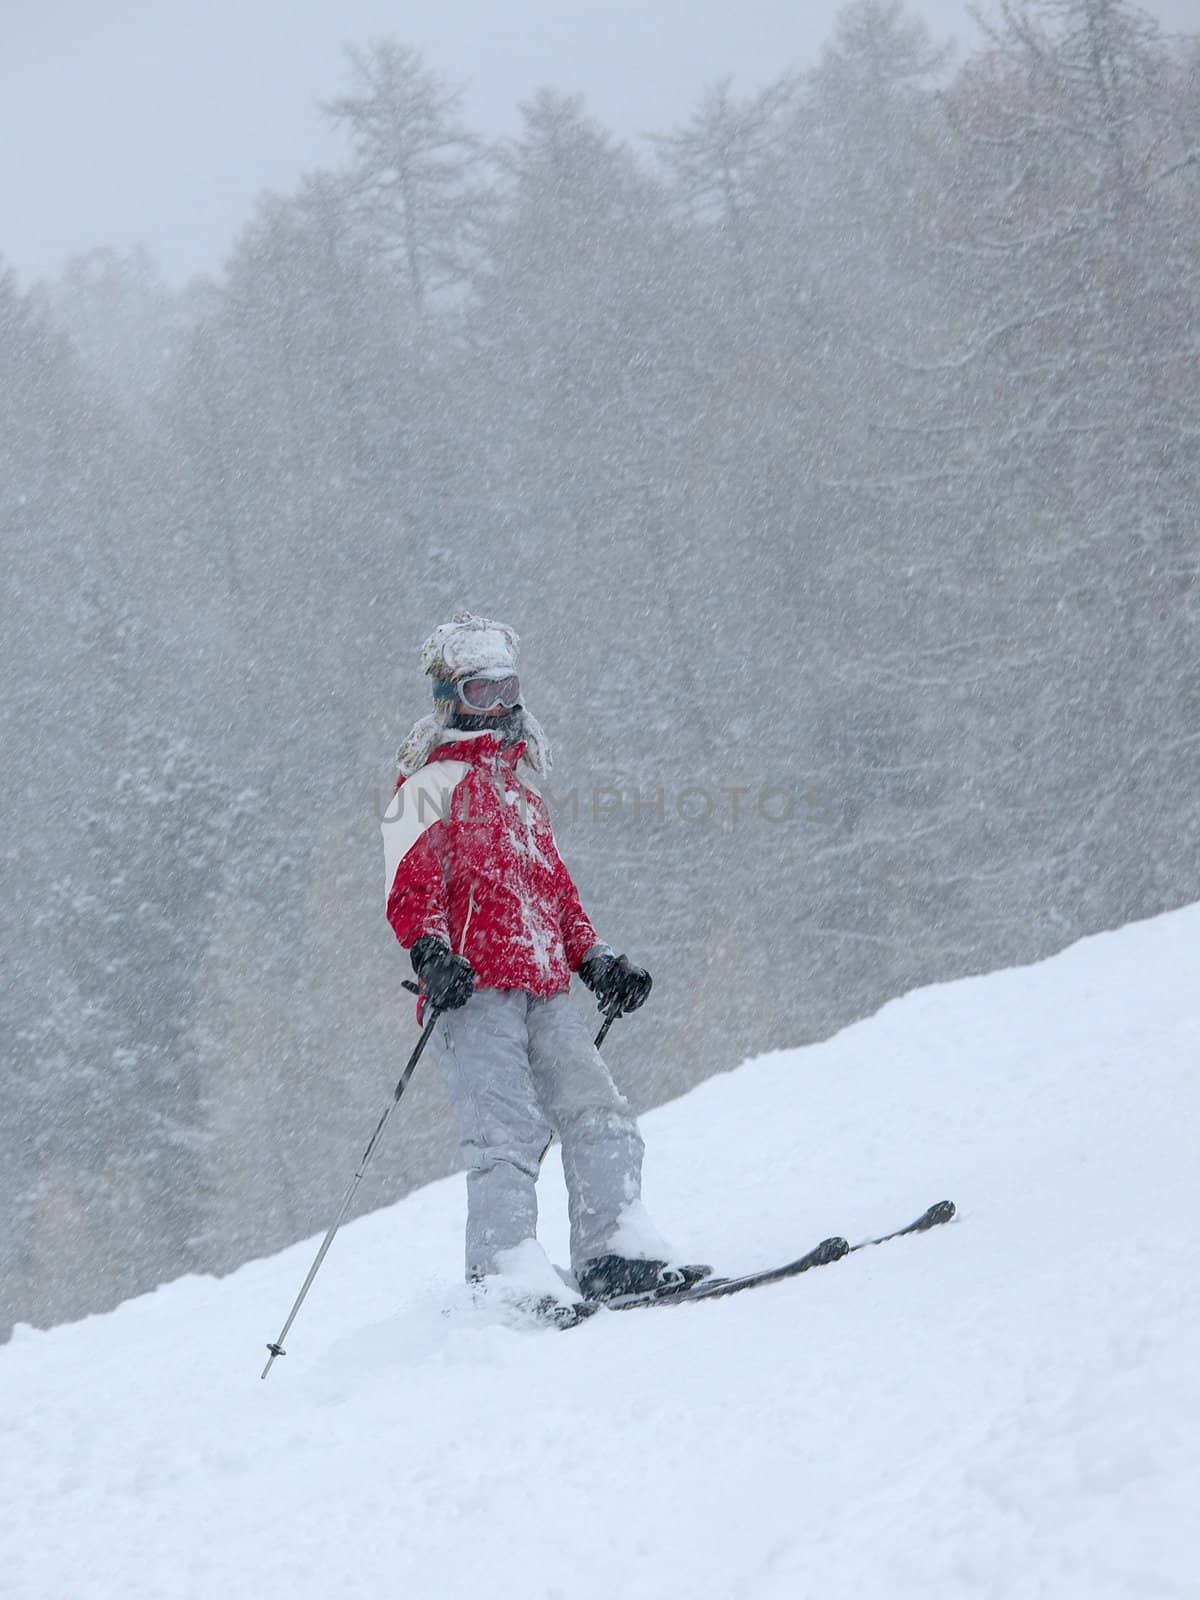 Skier in a heavy snow storm